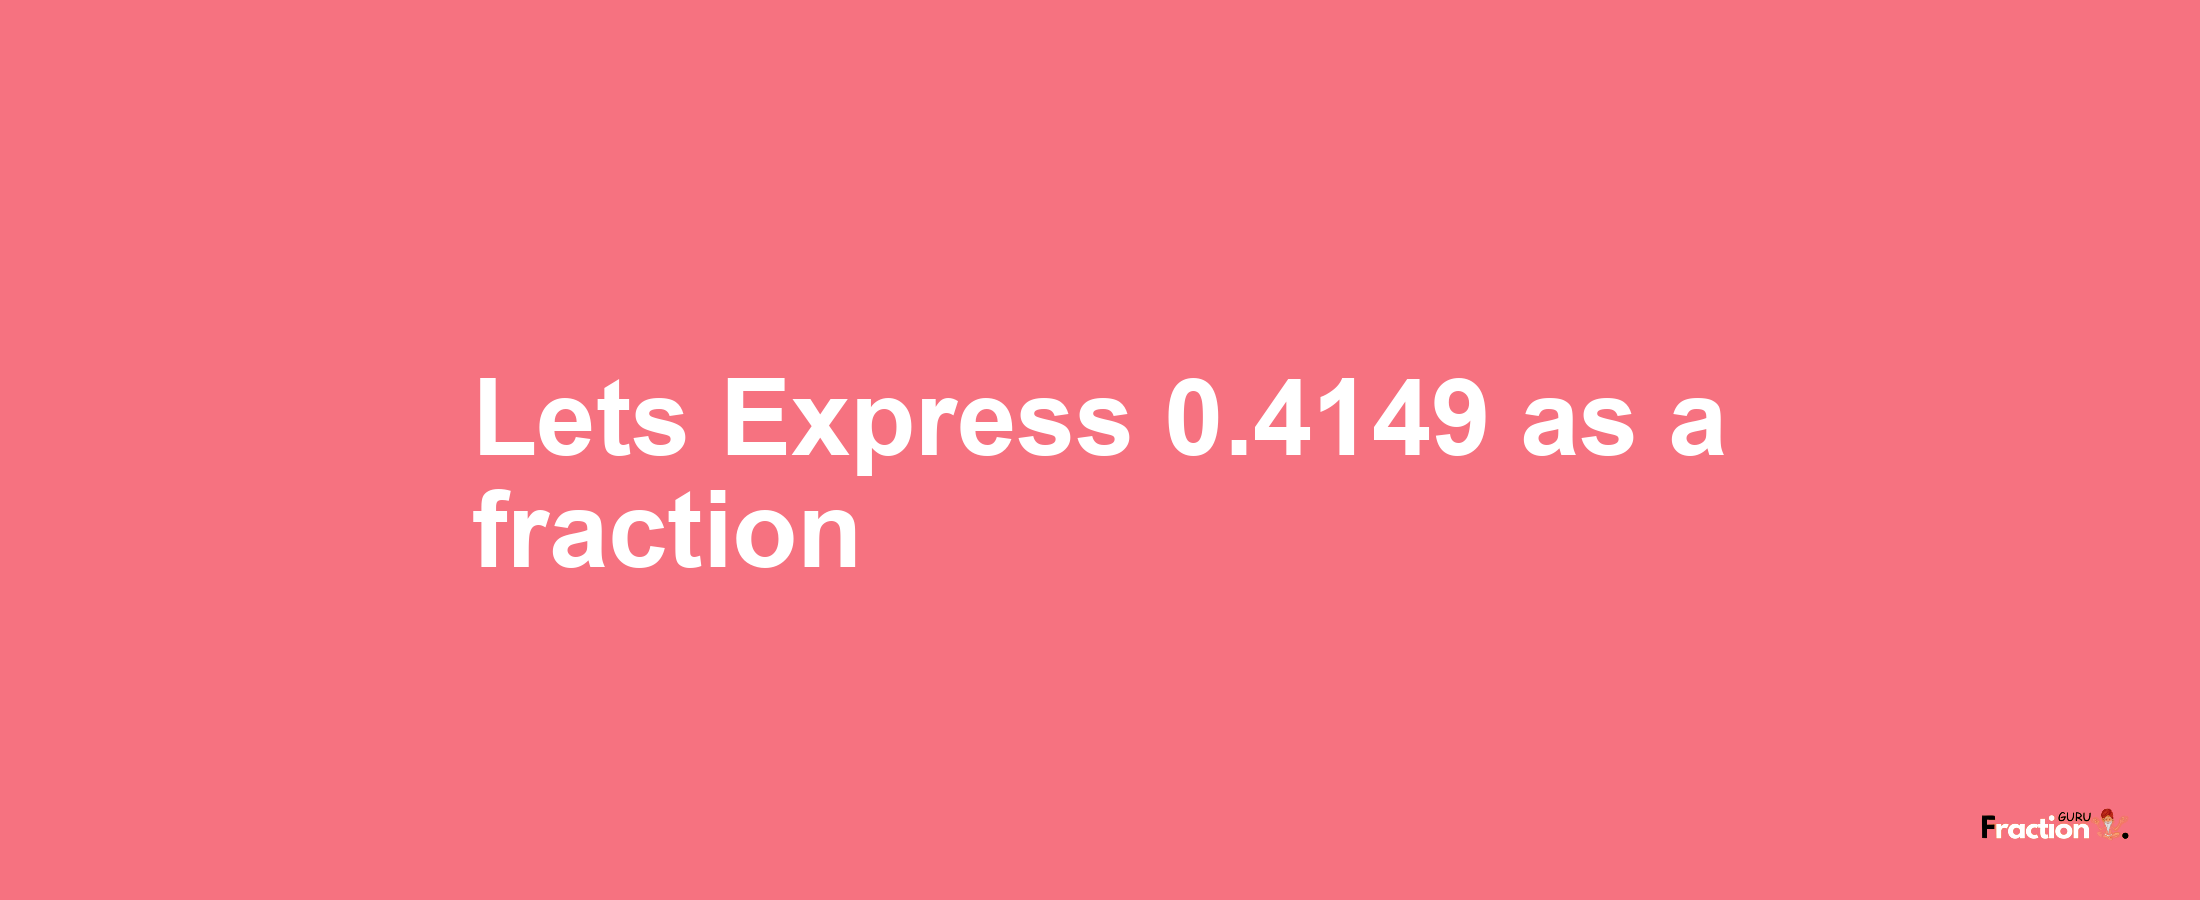 Lets Express 0.4149 as afraction